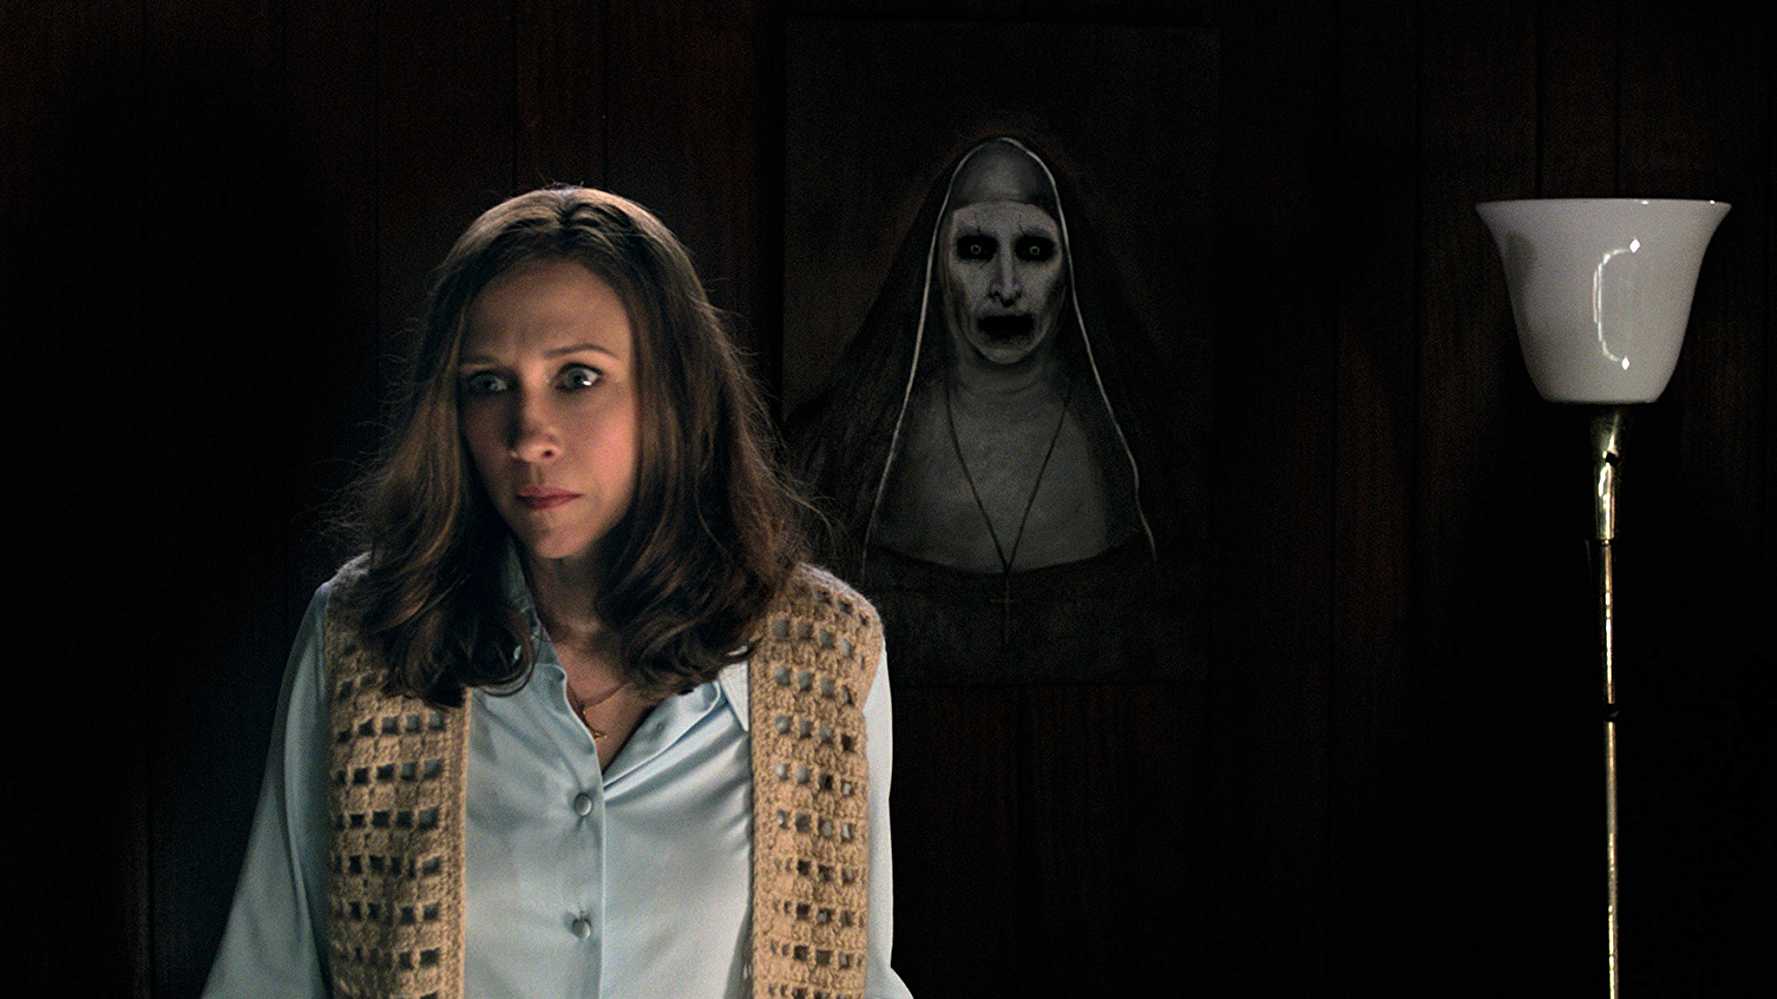 24 Most Anticipated Horror Movies of 2020